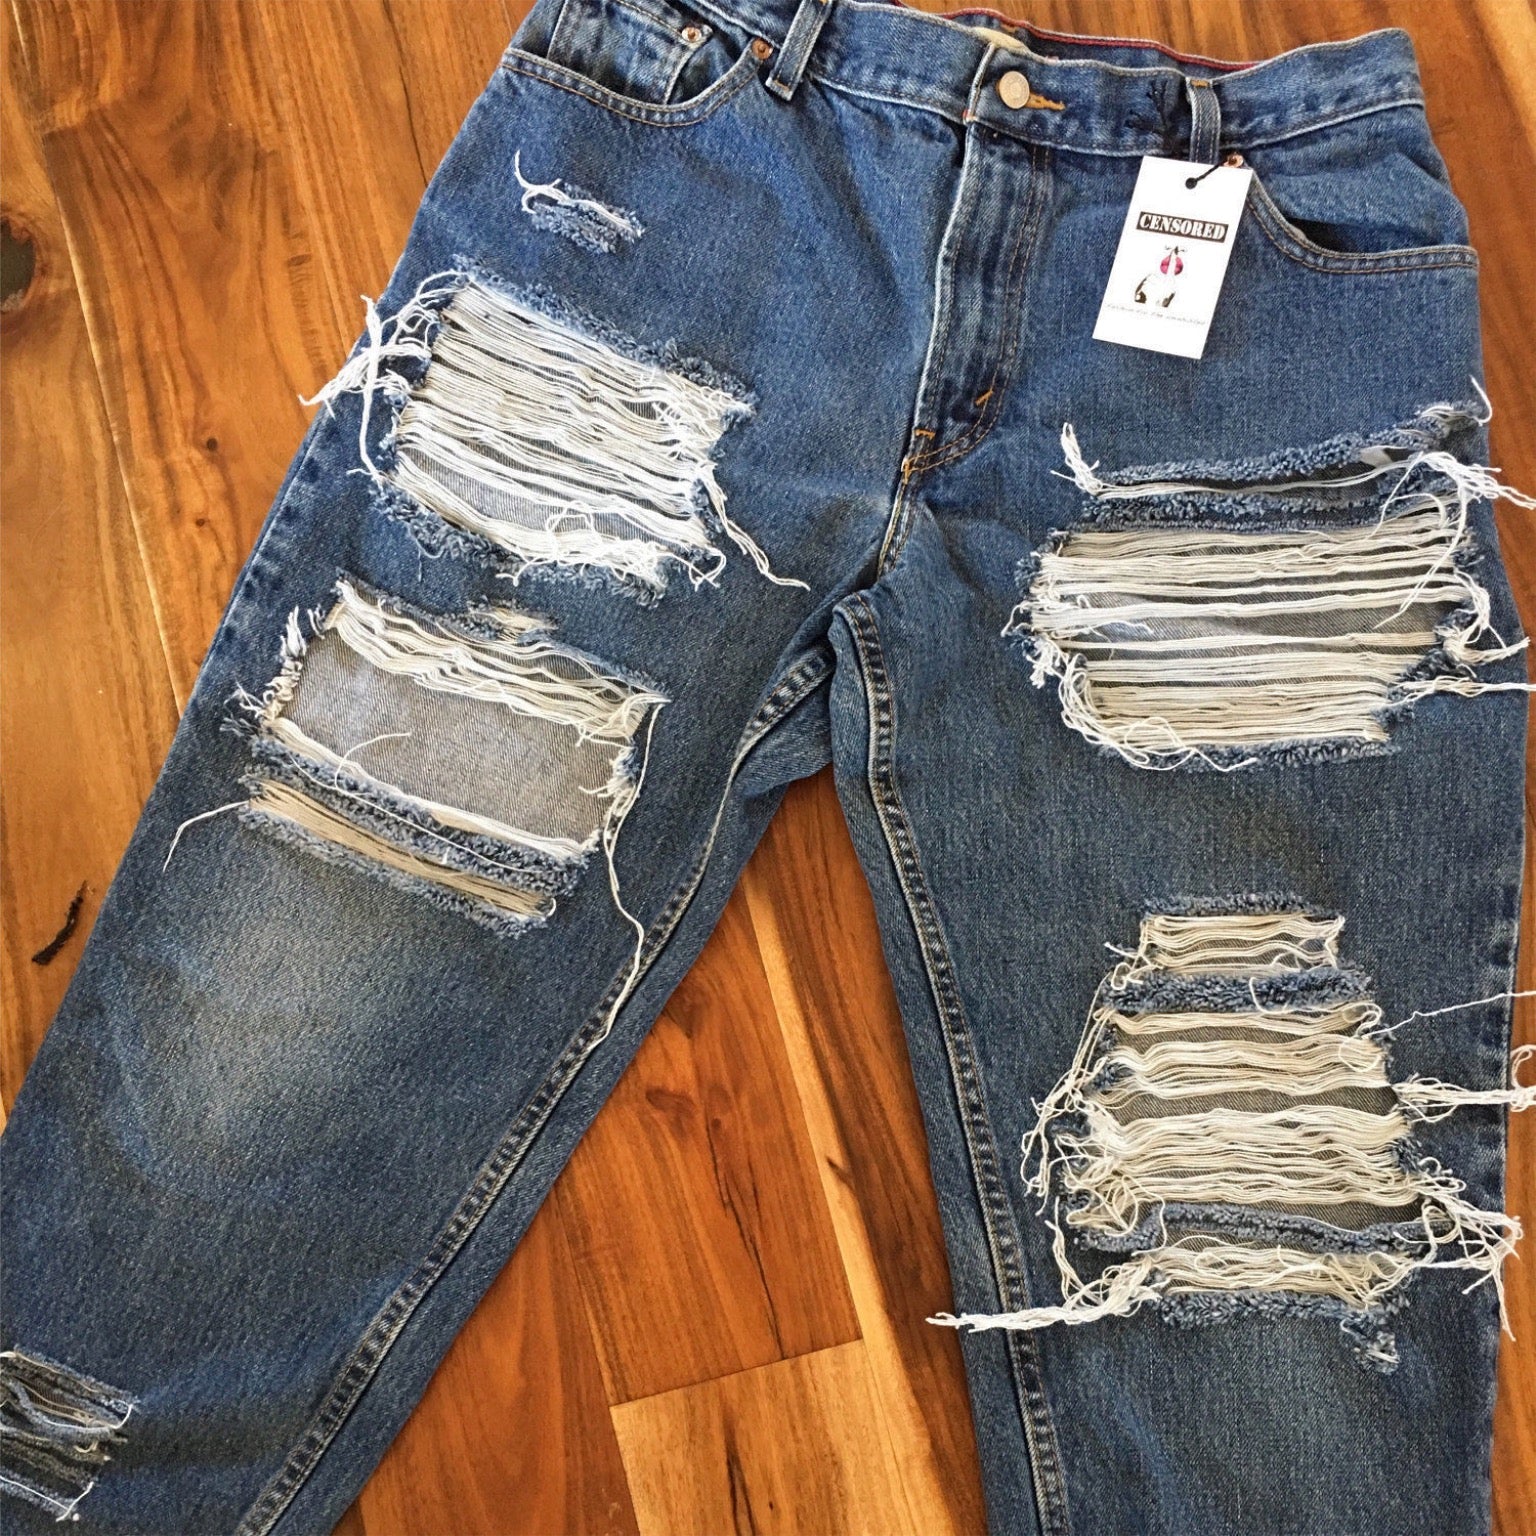 Made To Order Vintage Trashed High Waisted Boyfriend Jeans